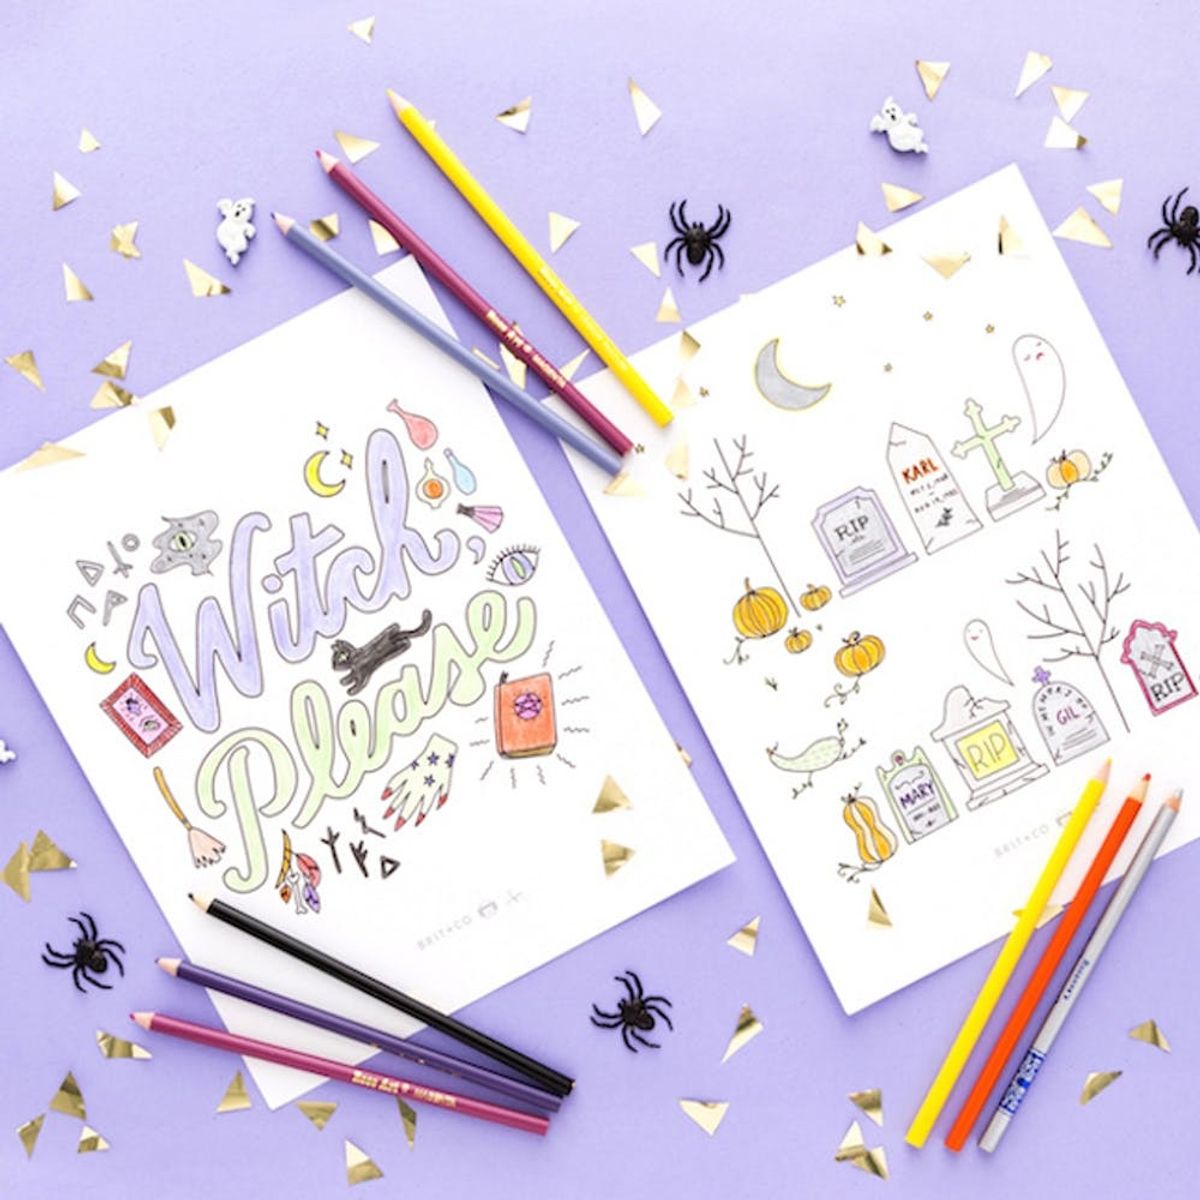 12 Halloween Coloring Page Printables to Keep Kids (and Adults!) Busy